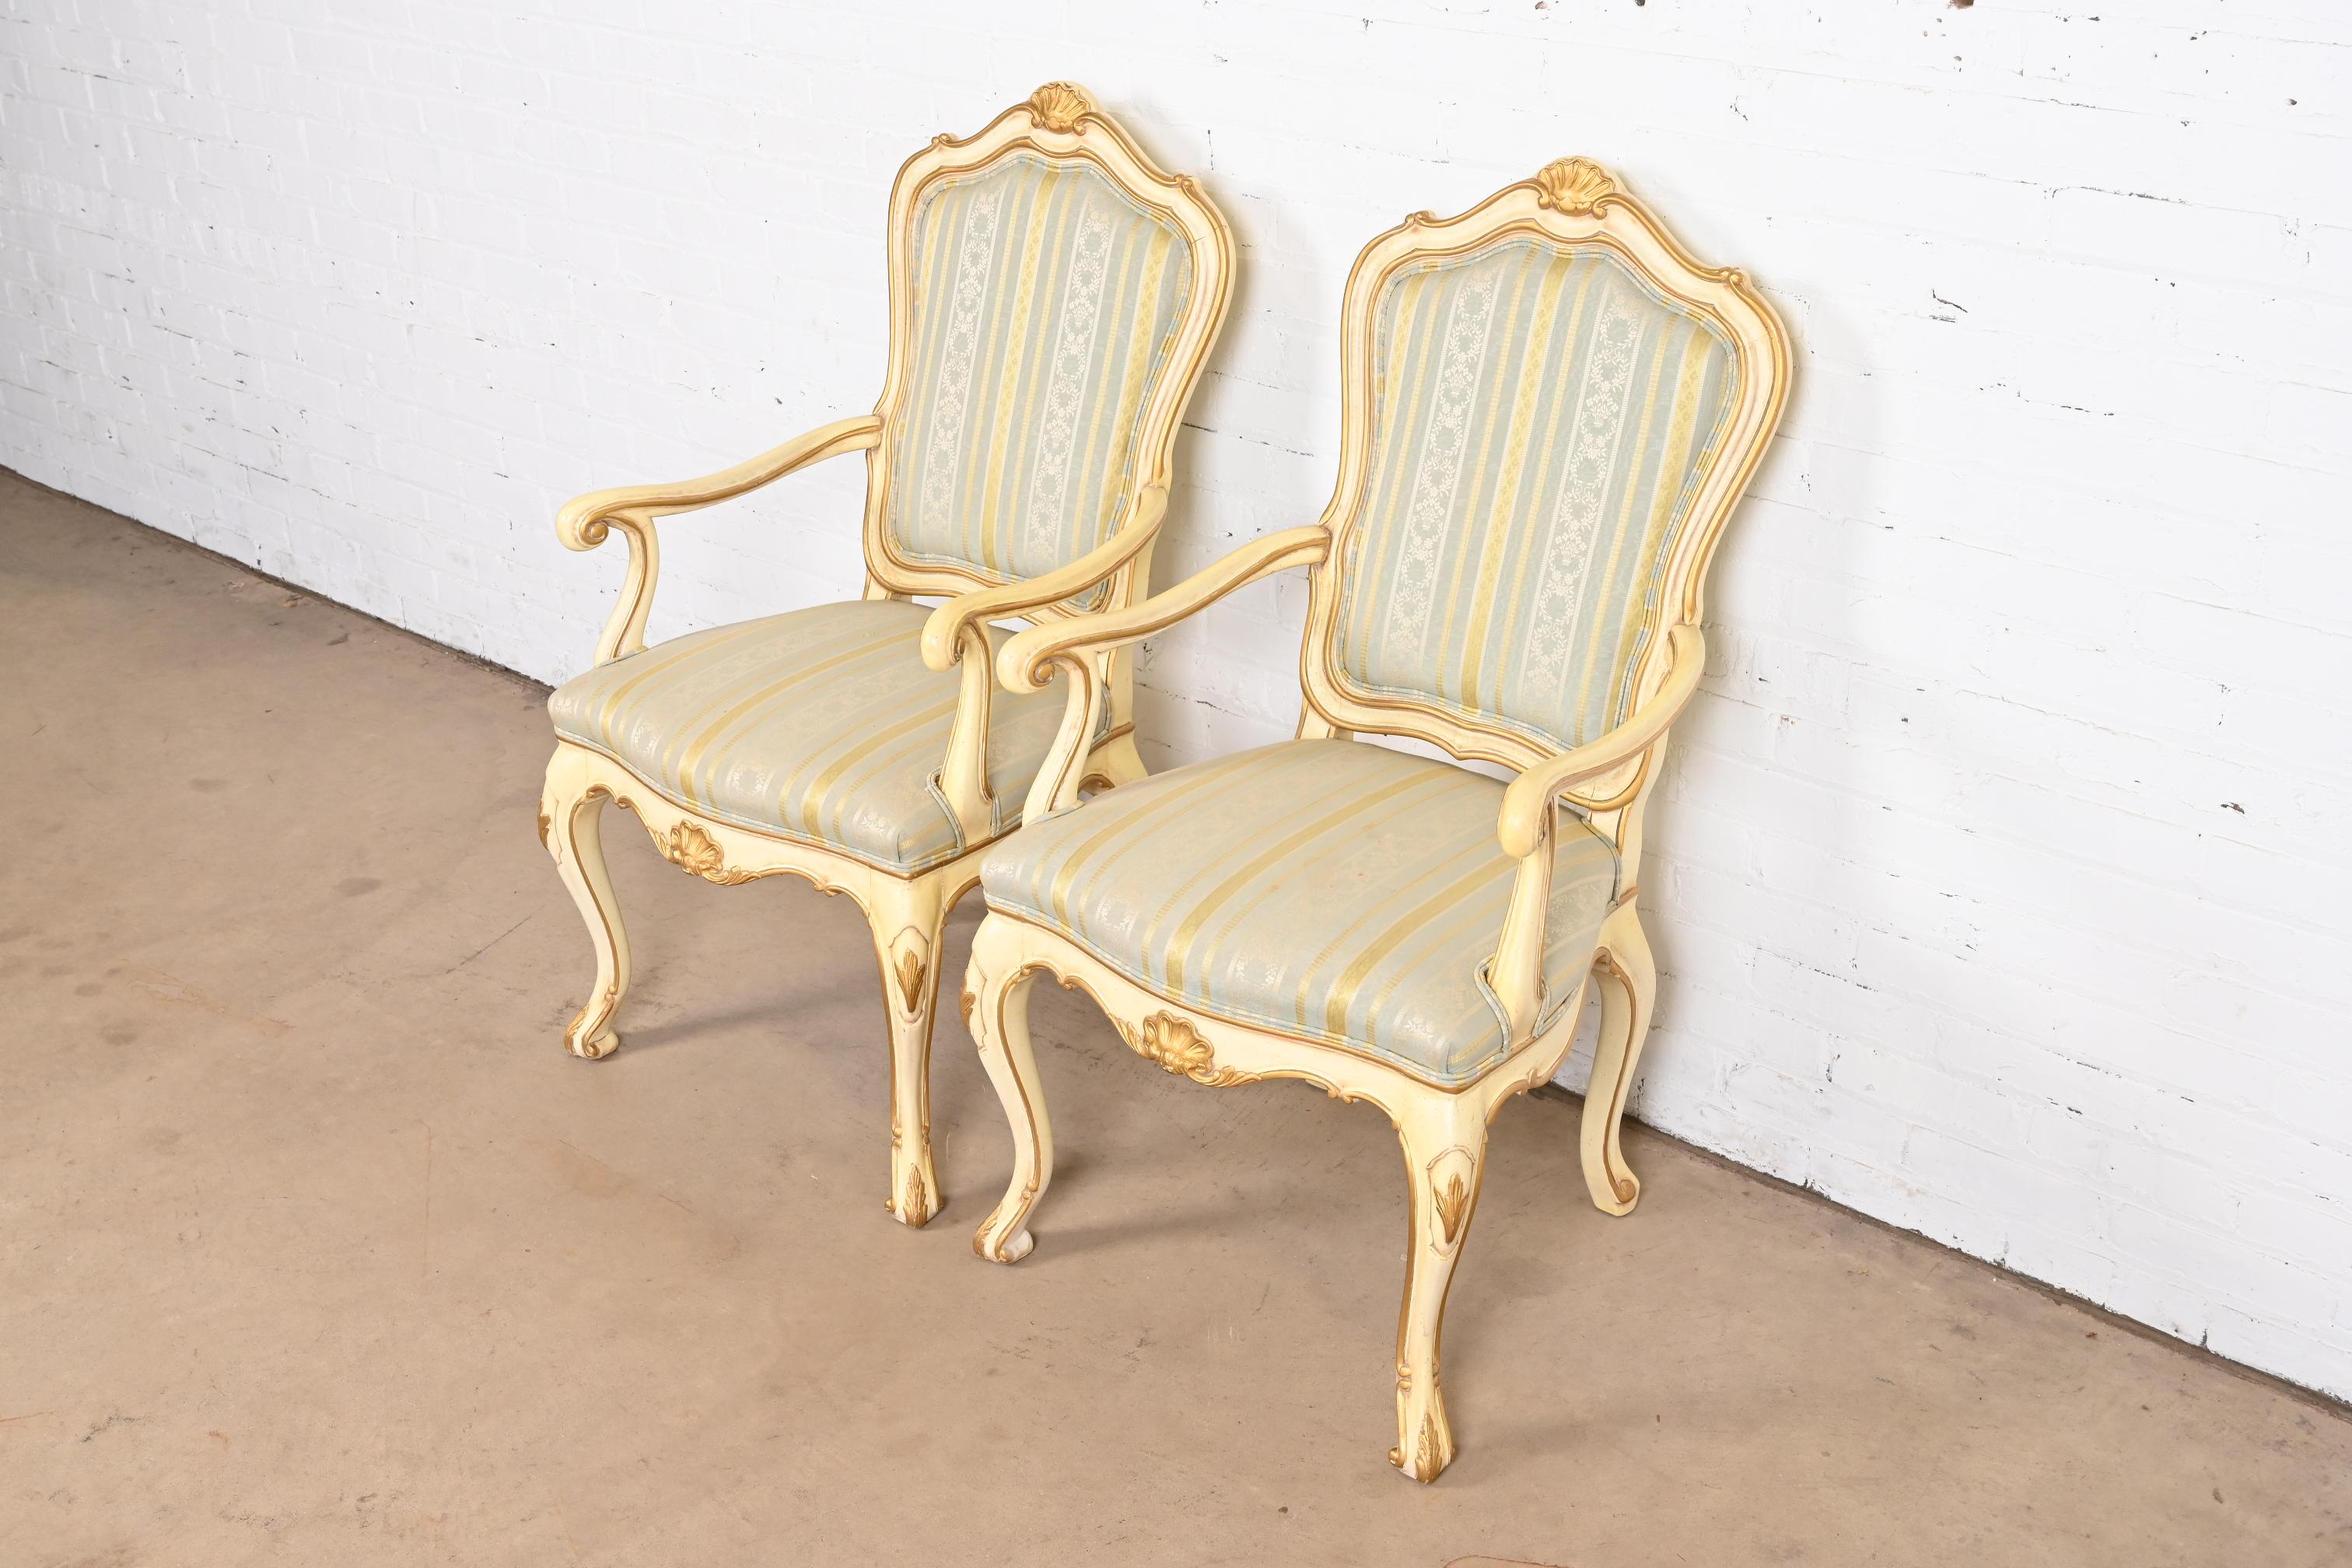 Karges French Rococo Louis XV Cream Lacquered and Gold Gilt Fauteuils, Pair 1